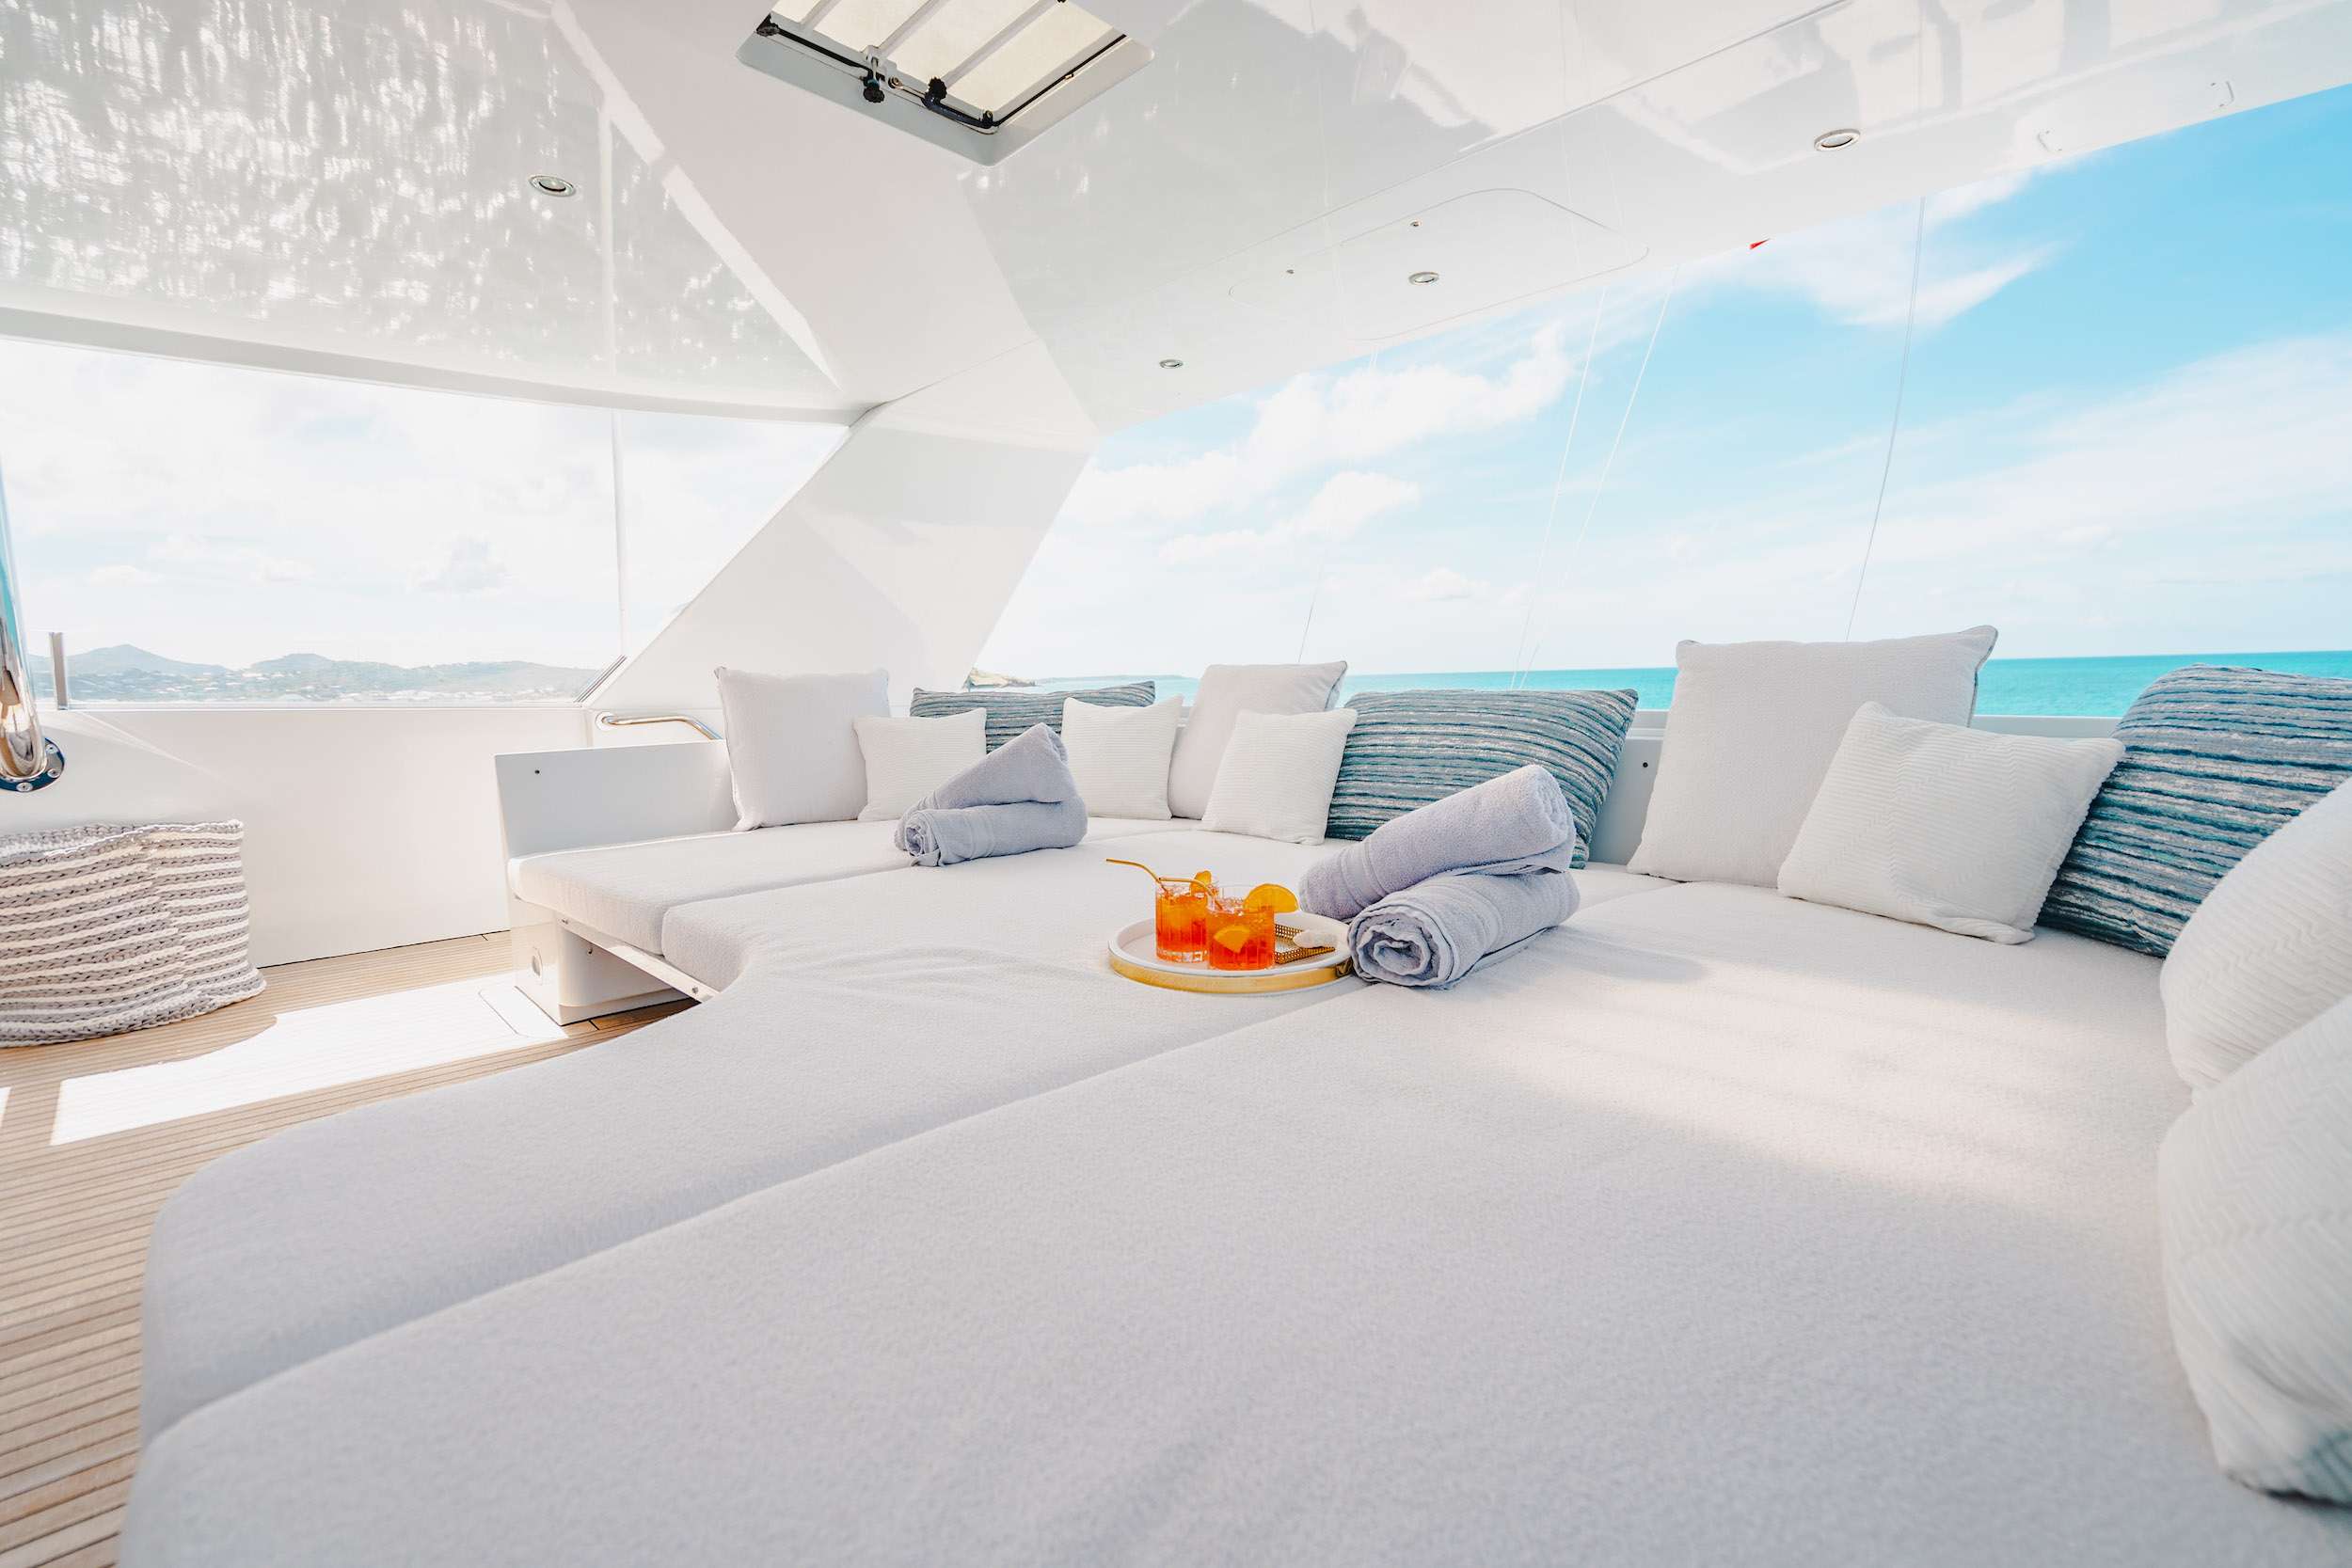 GALE WINDS Yacht Charter - Skydeck Daybed